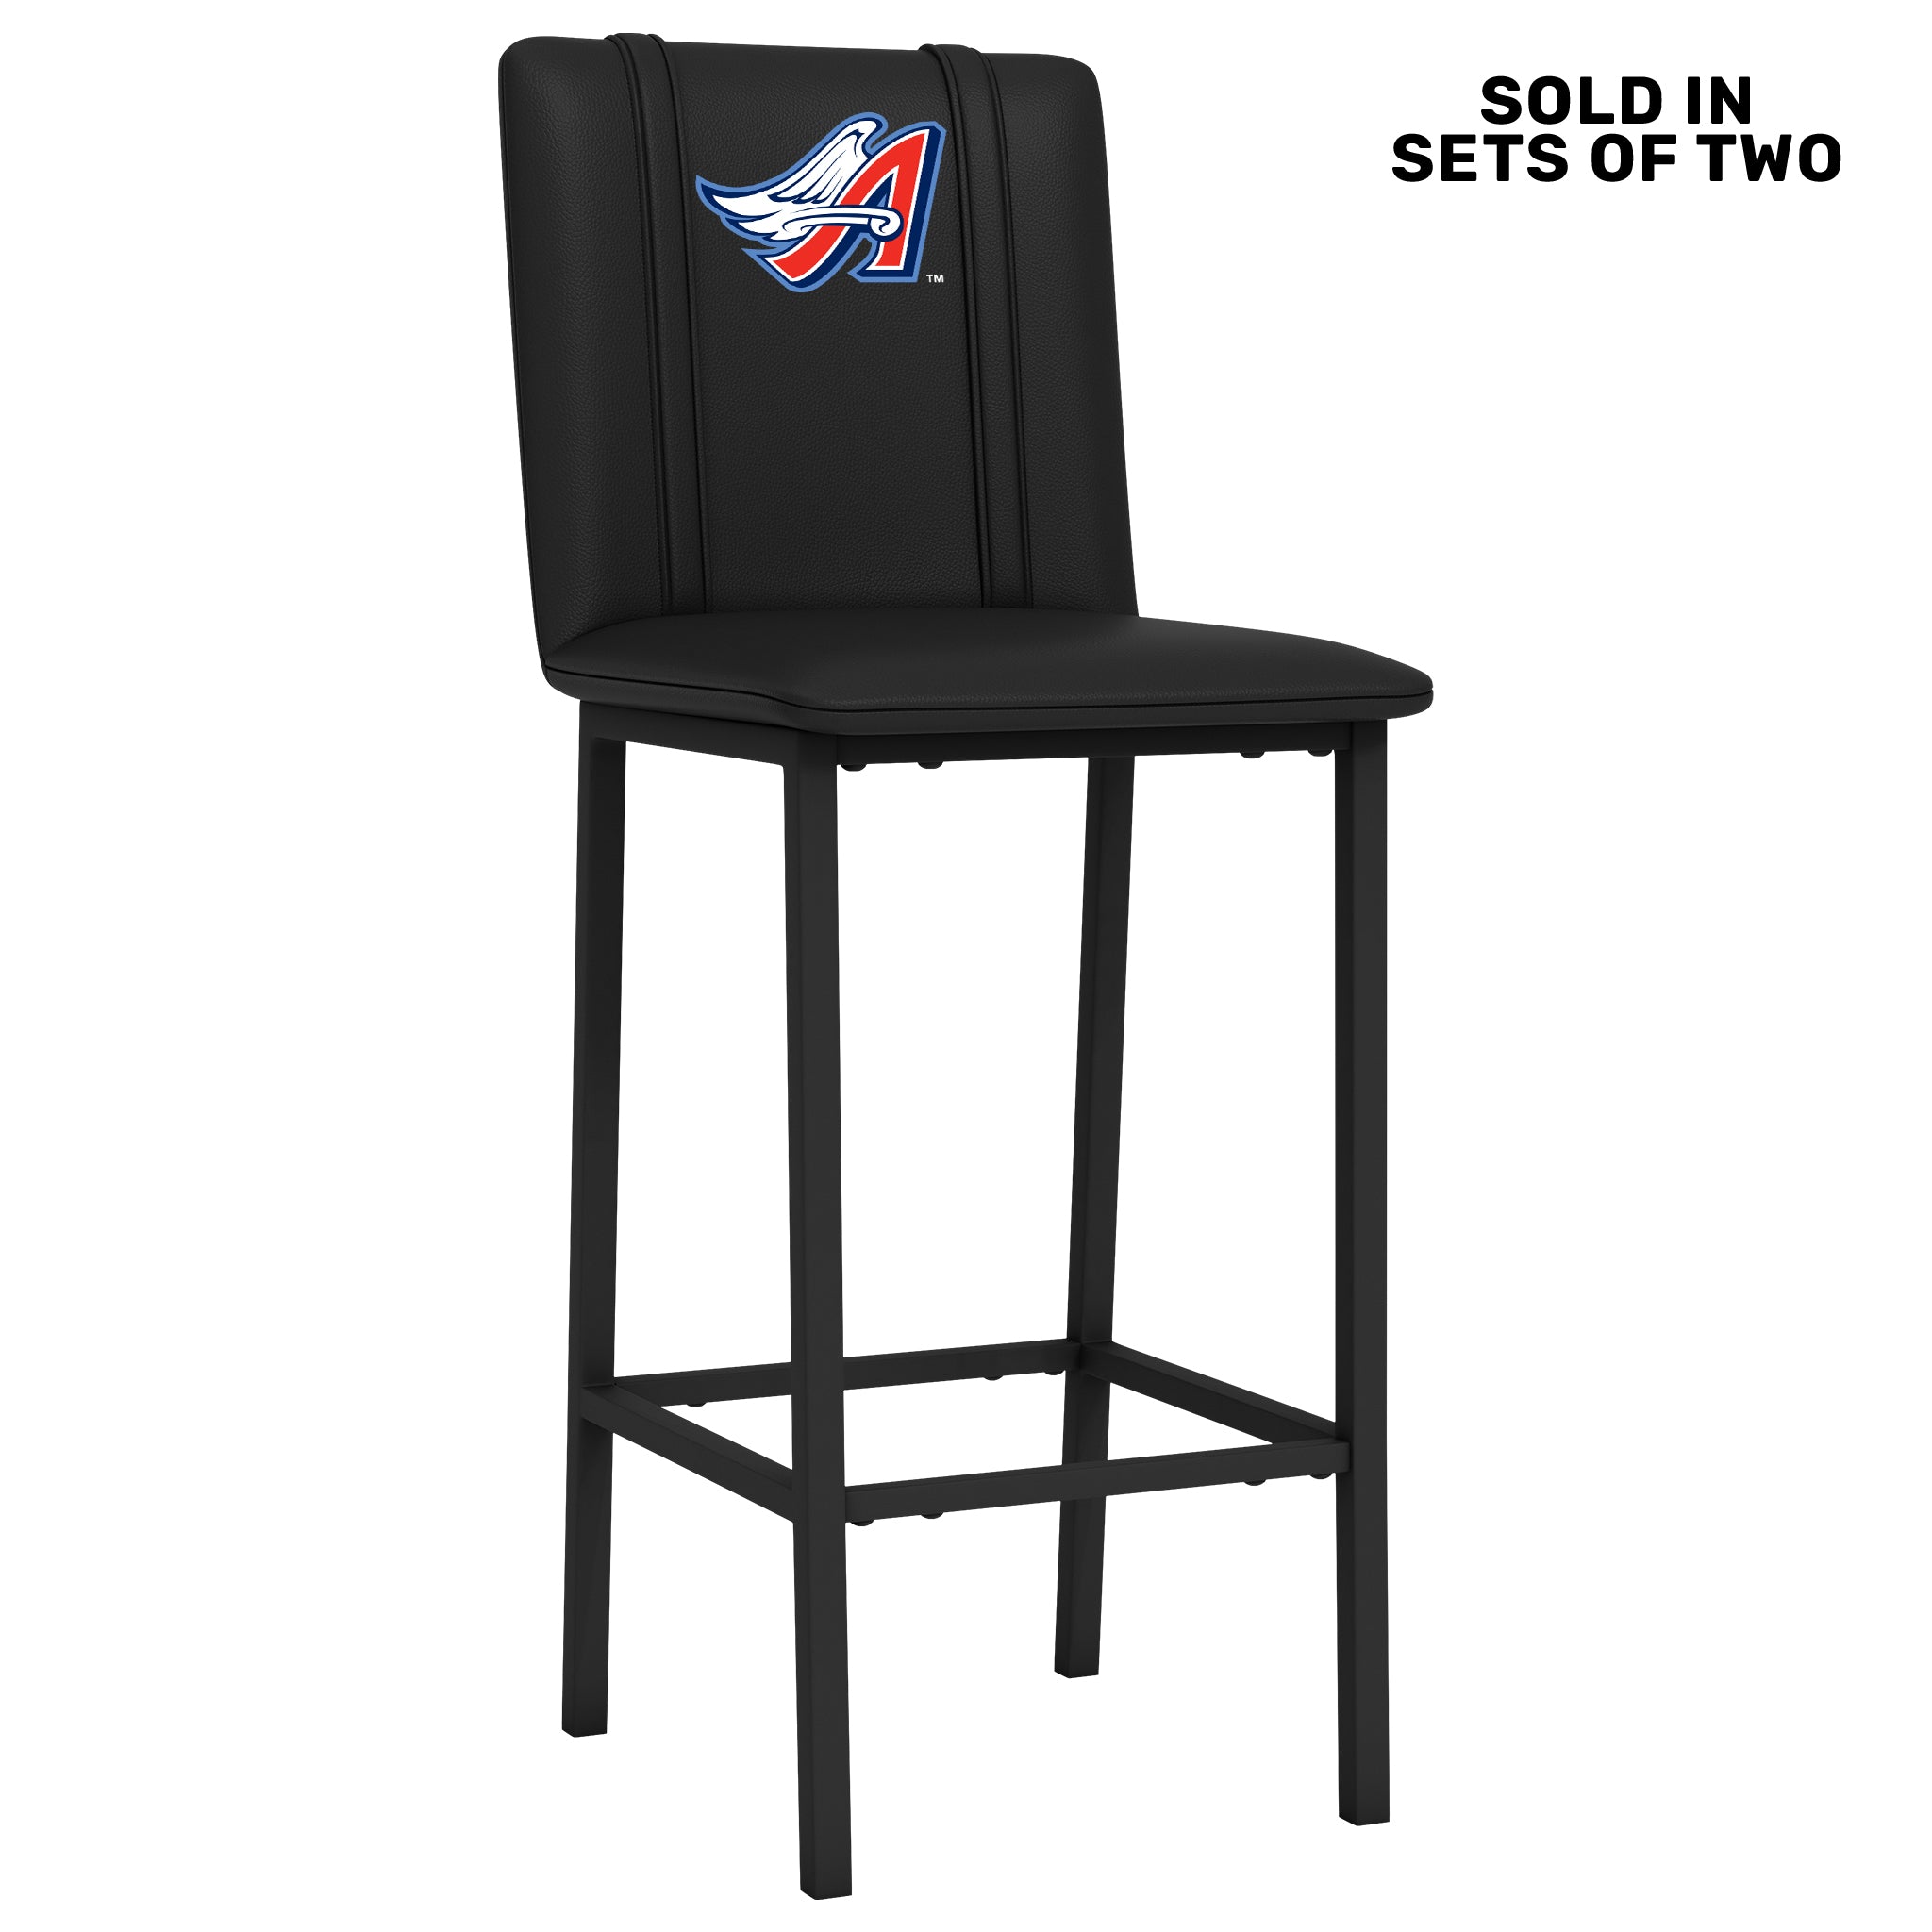 Bar Stool 500 with California Angels Cooperstown Primary Set of 2